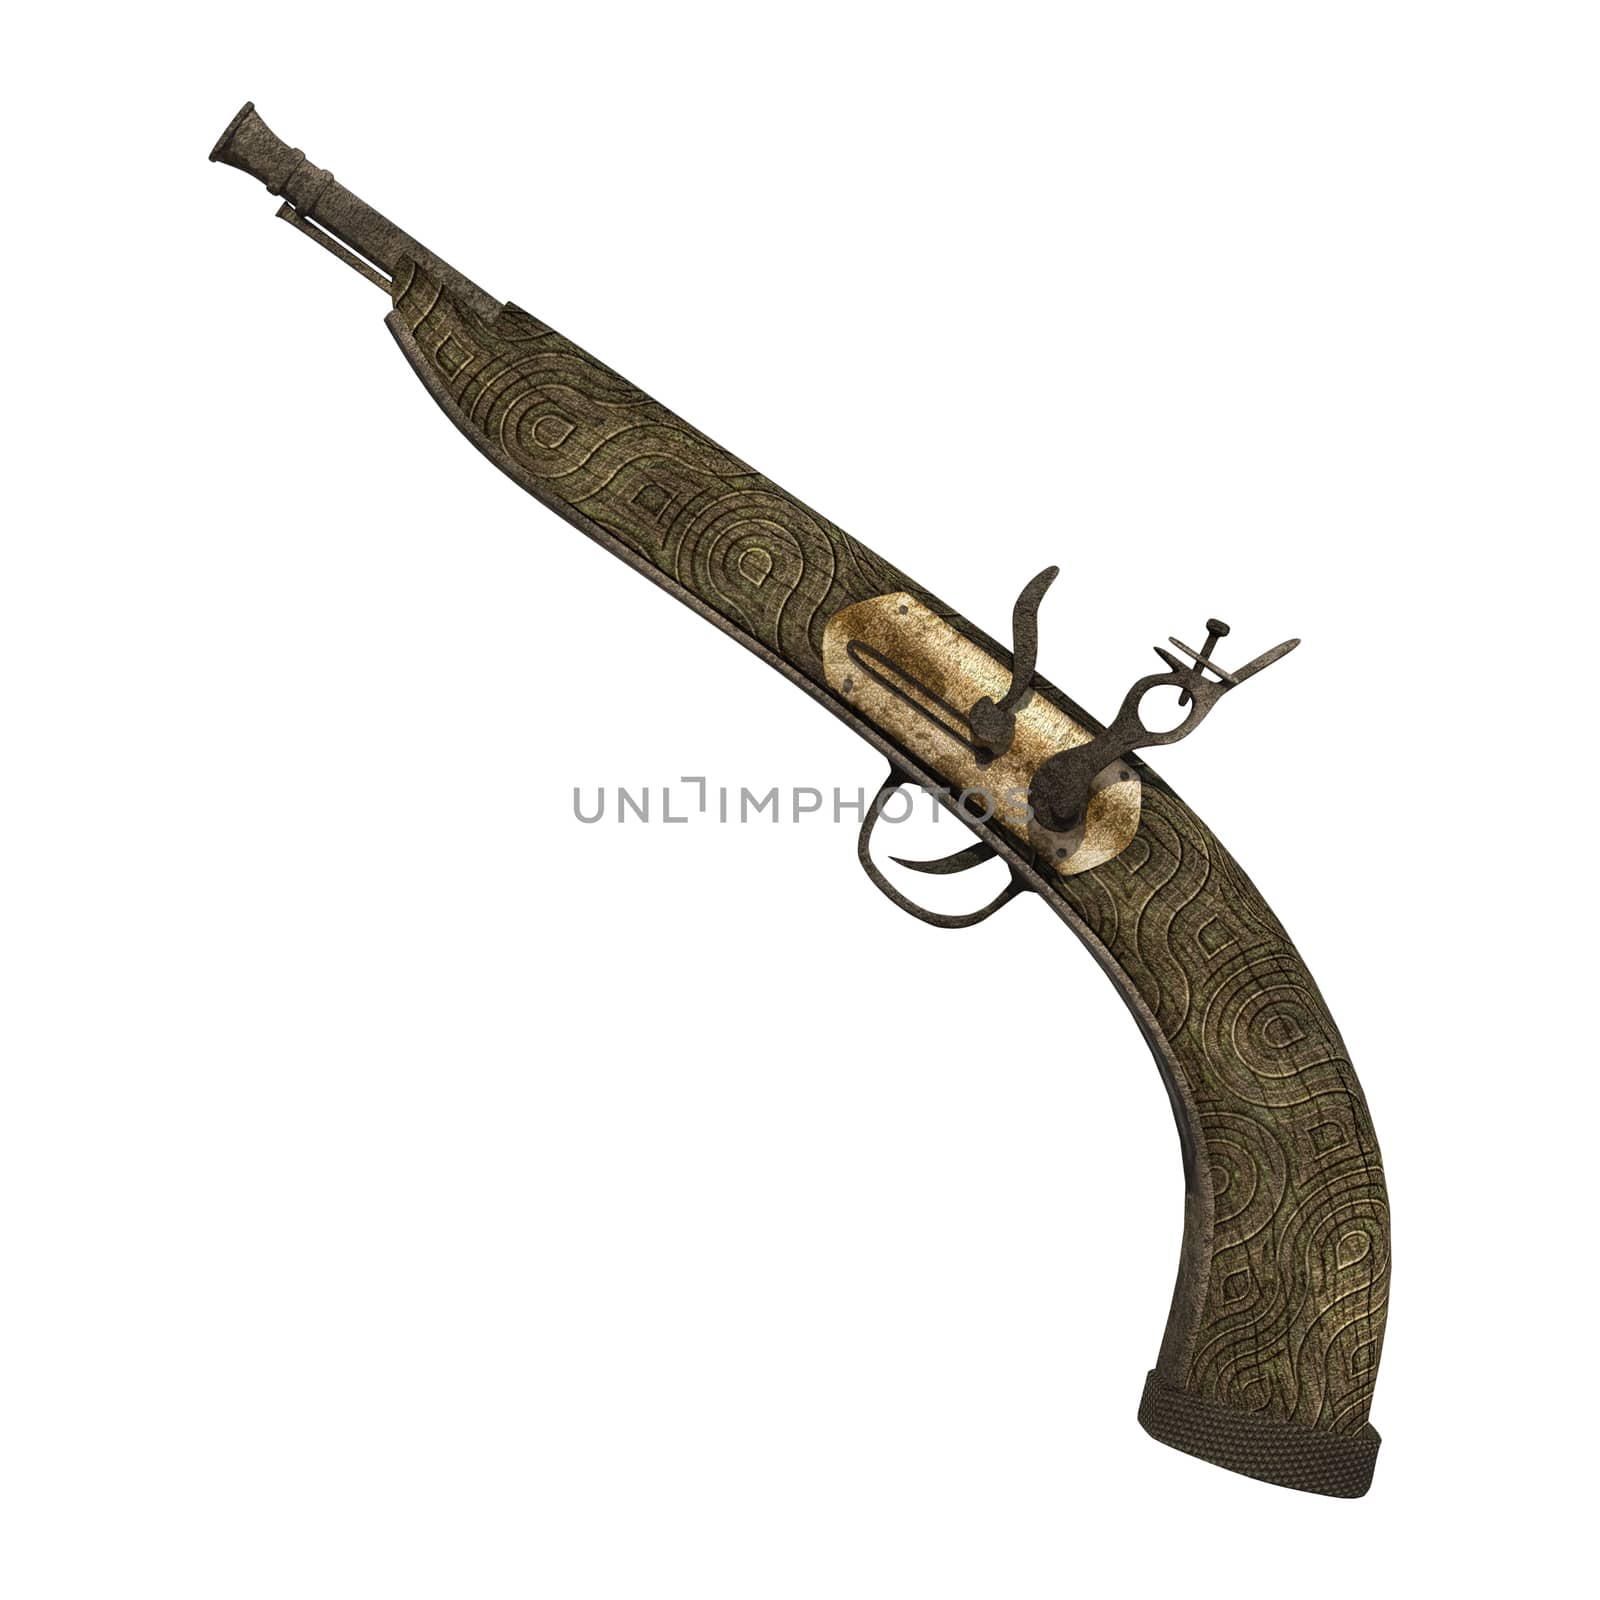 3D digital render of an old gun isolated on white background